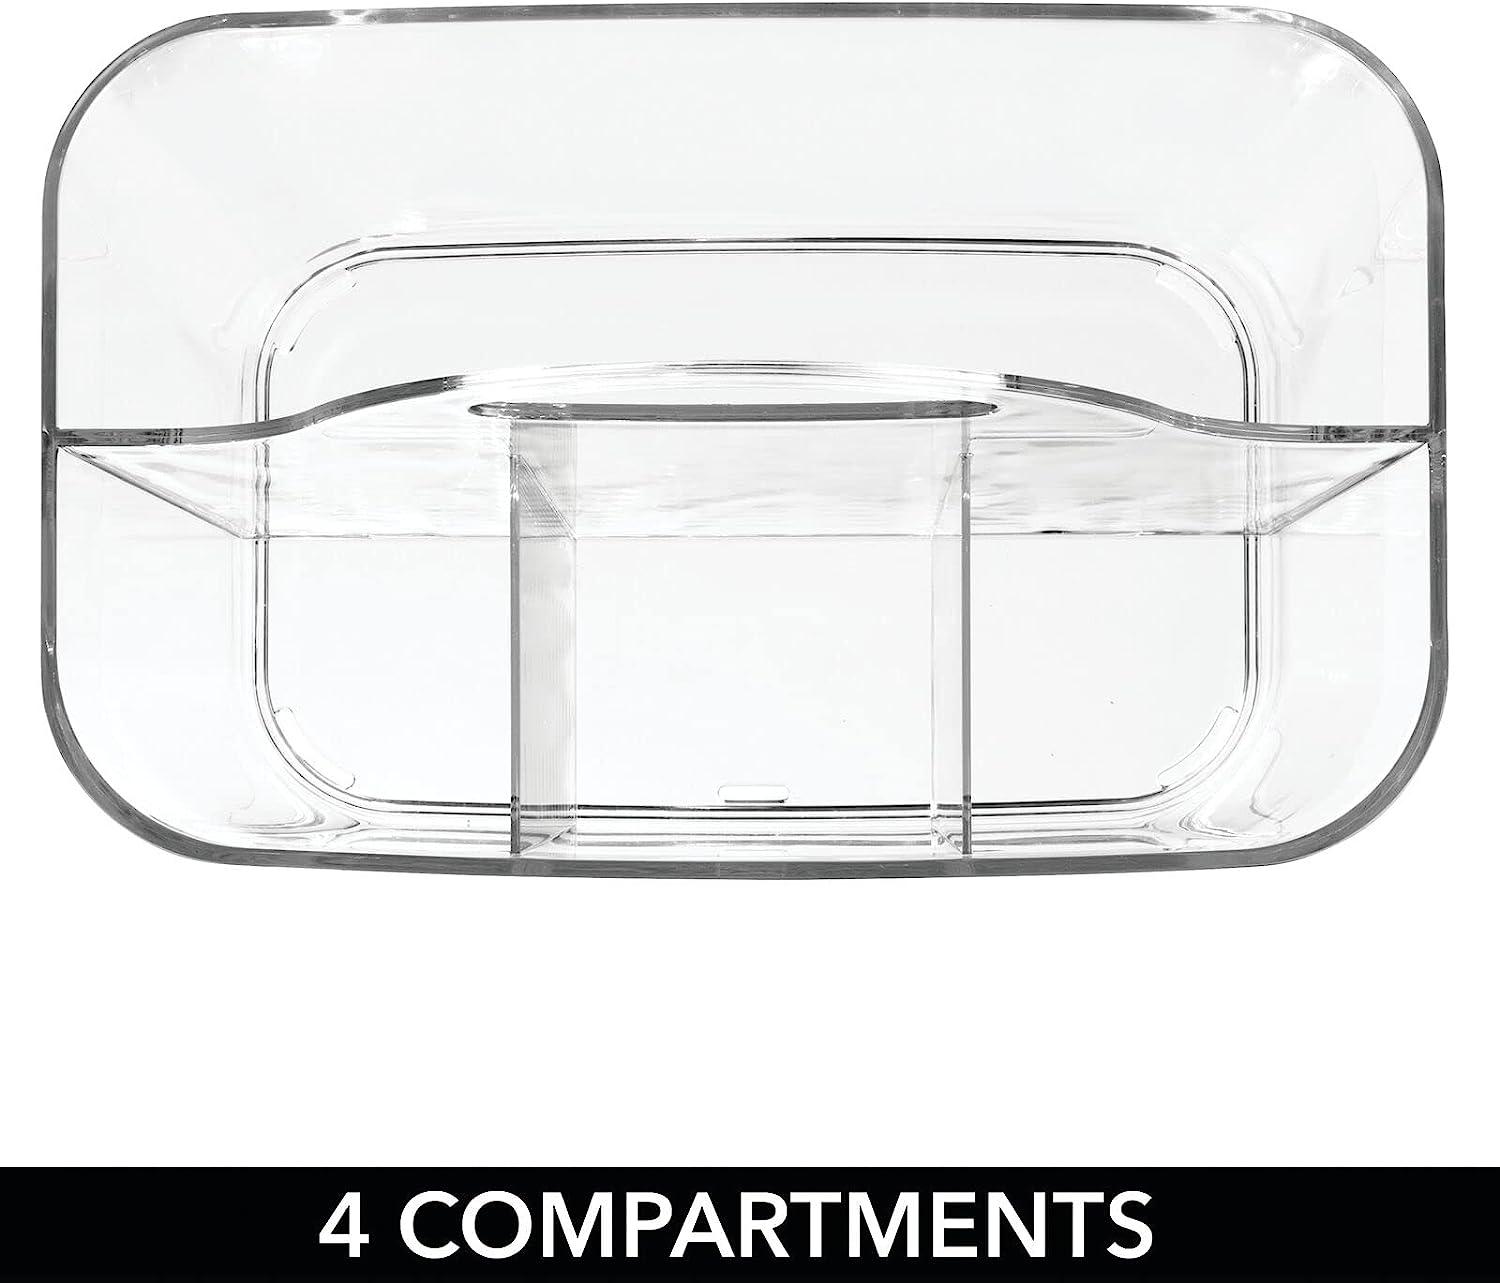 mDesign Plastic Divided Portable Shower Caddy Storage Organizer -  Clear/Natural